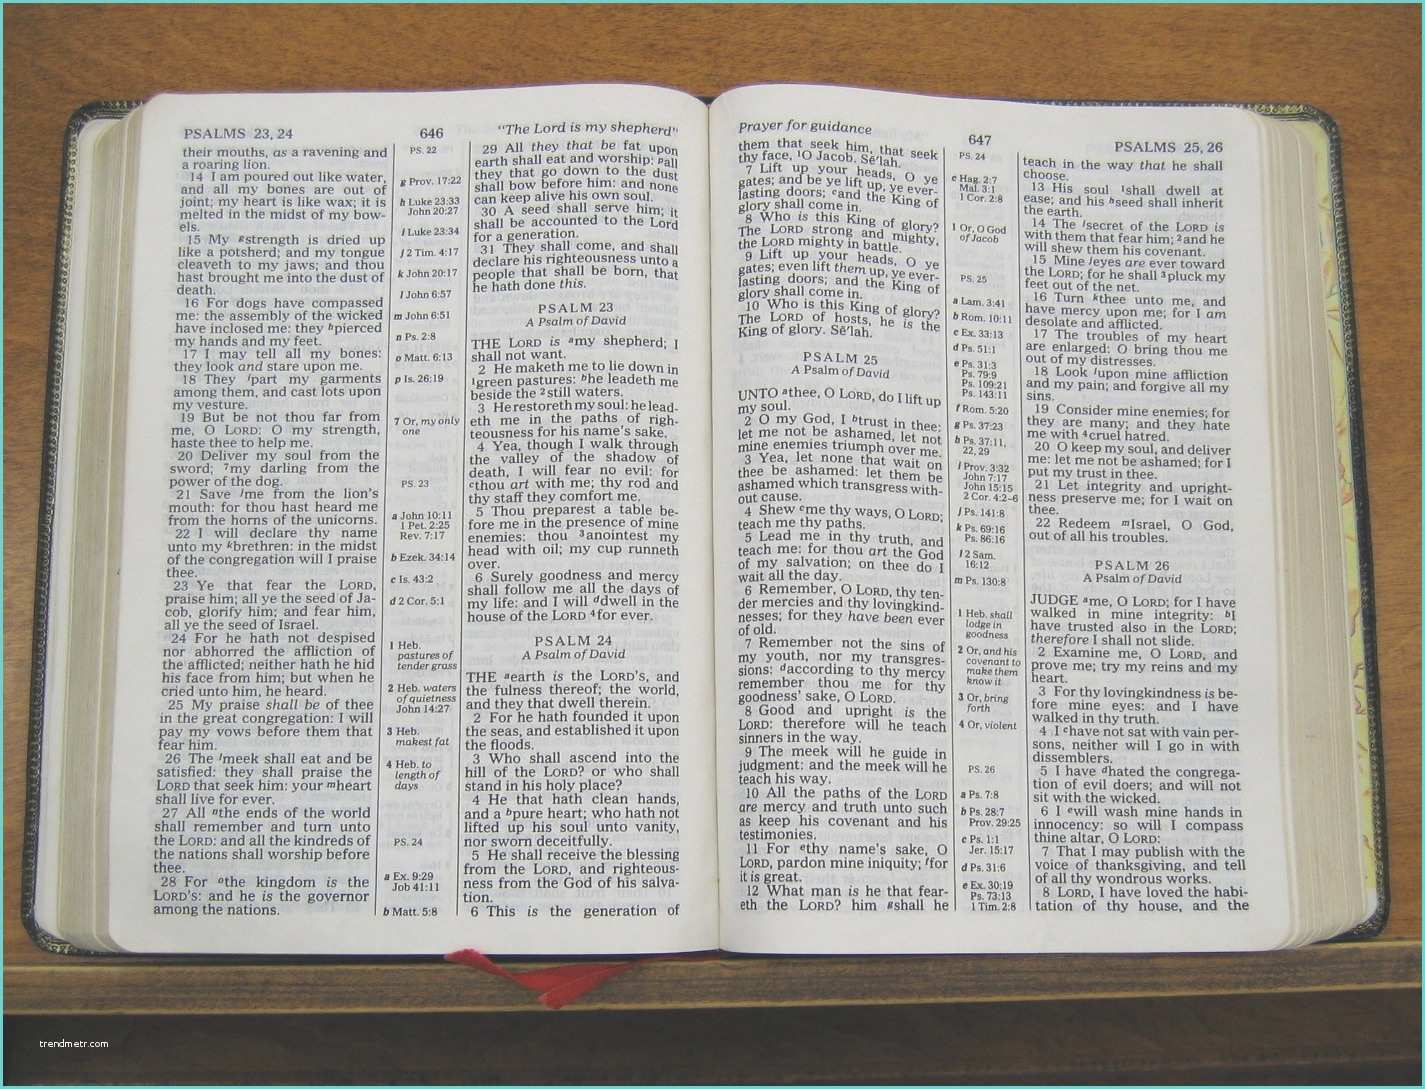 Bible Kjv Verses Writing Style Use Of An In Plete Sentence as A